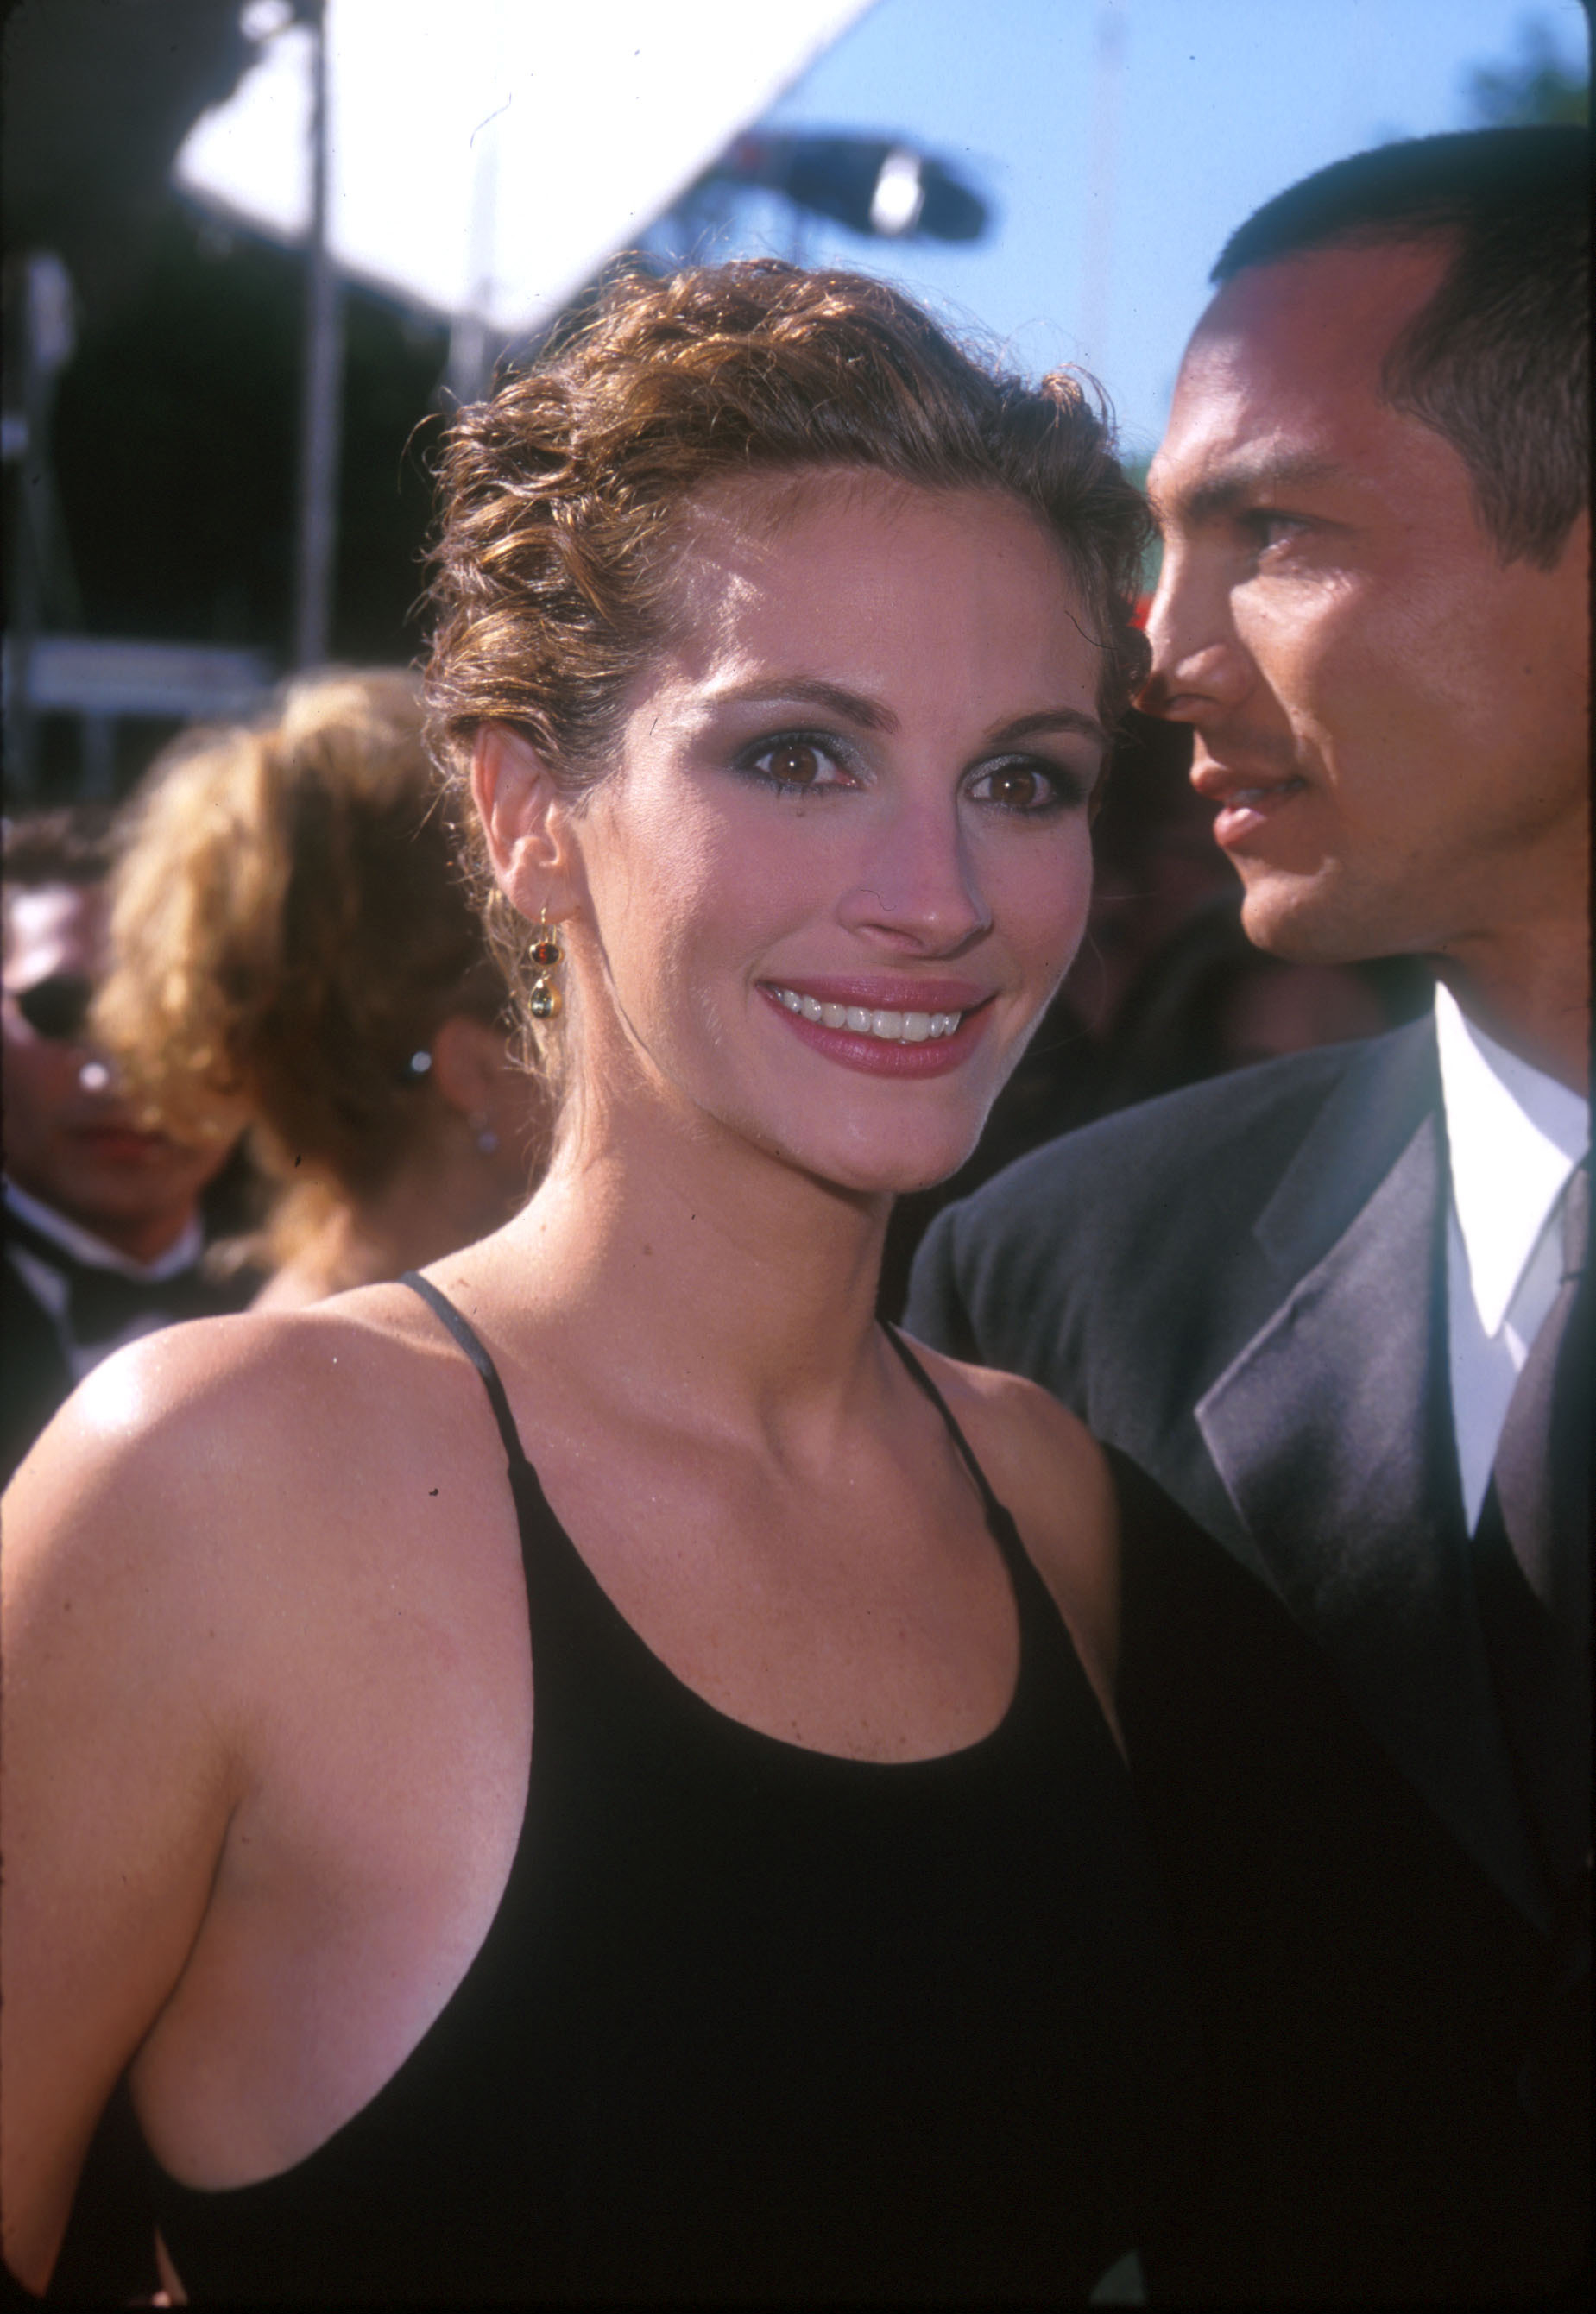 Julia Roberts in a black sleeveless dress posing next to an unidentifiable man on the red carpet